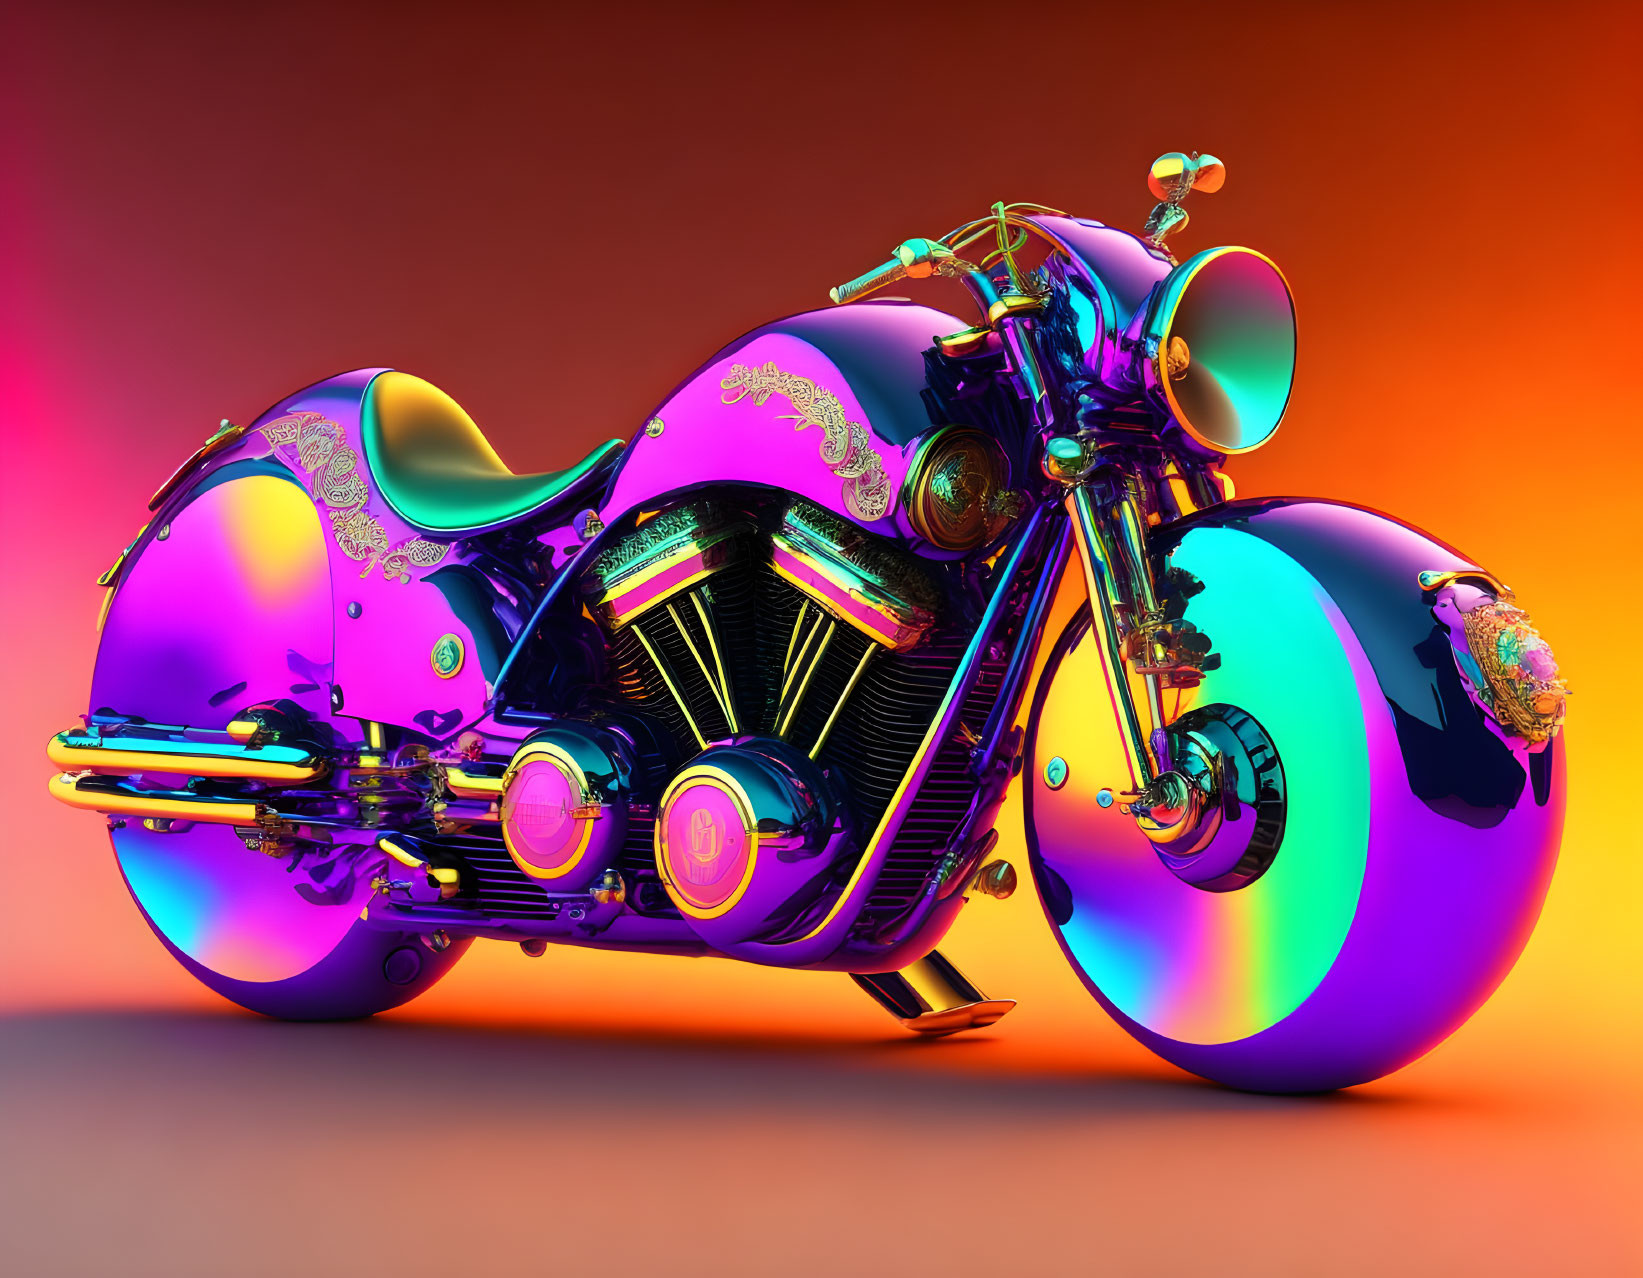 Colorful iridescent motorcycle with ornate details on gradient backdrop